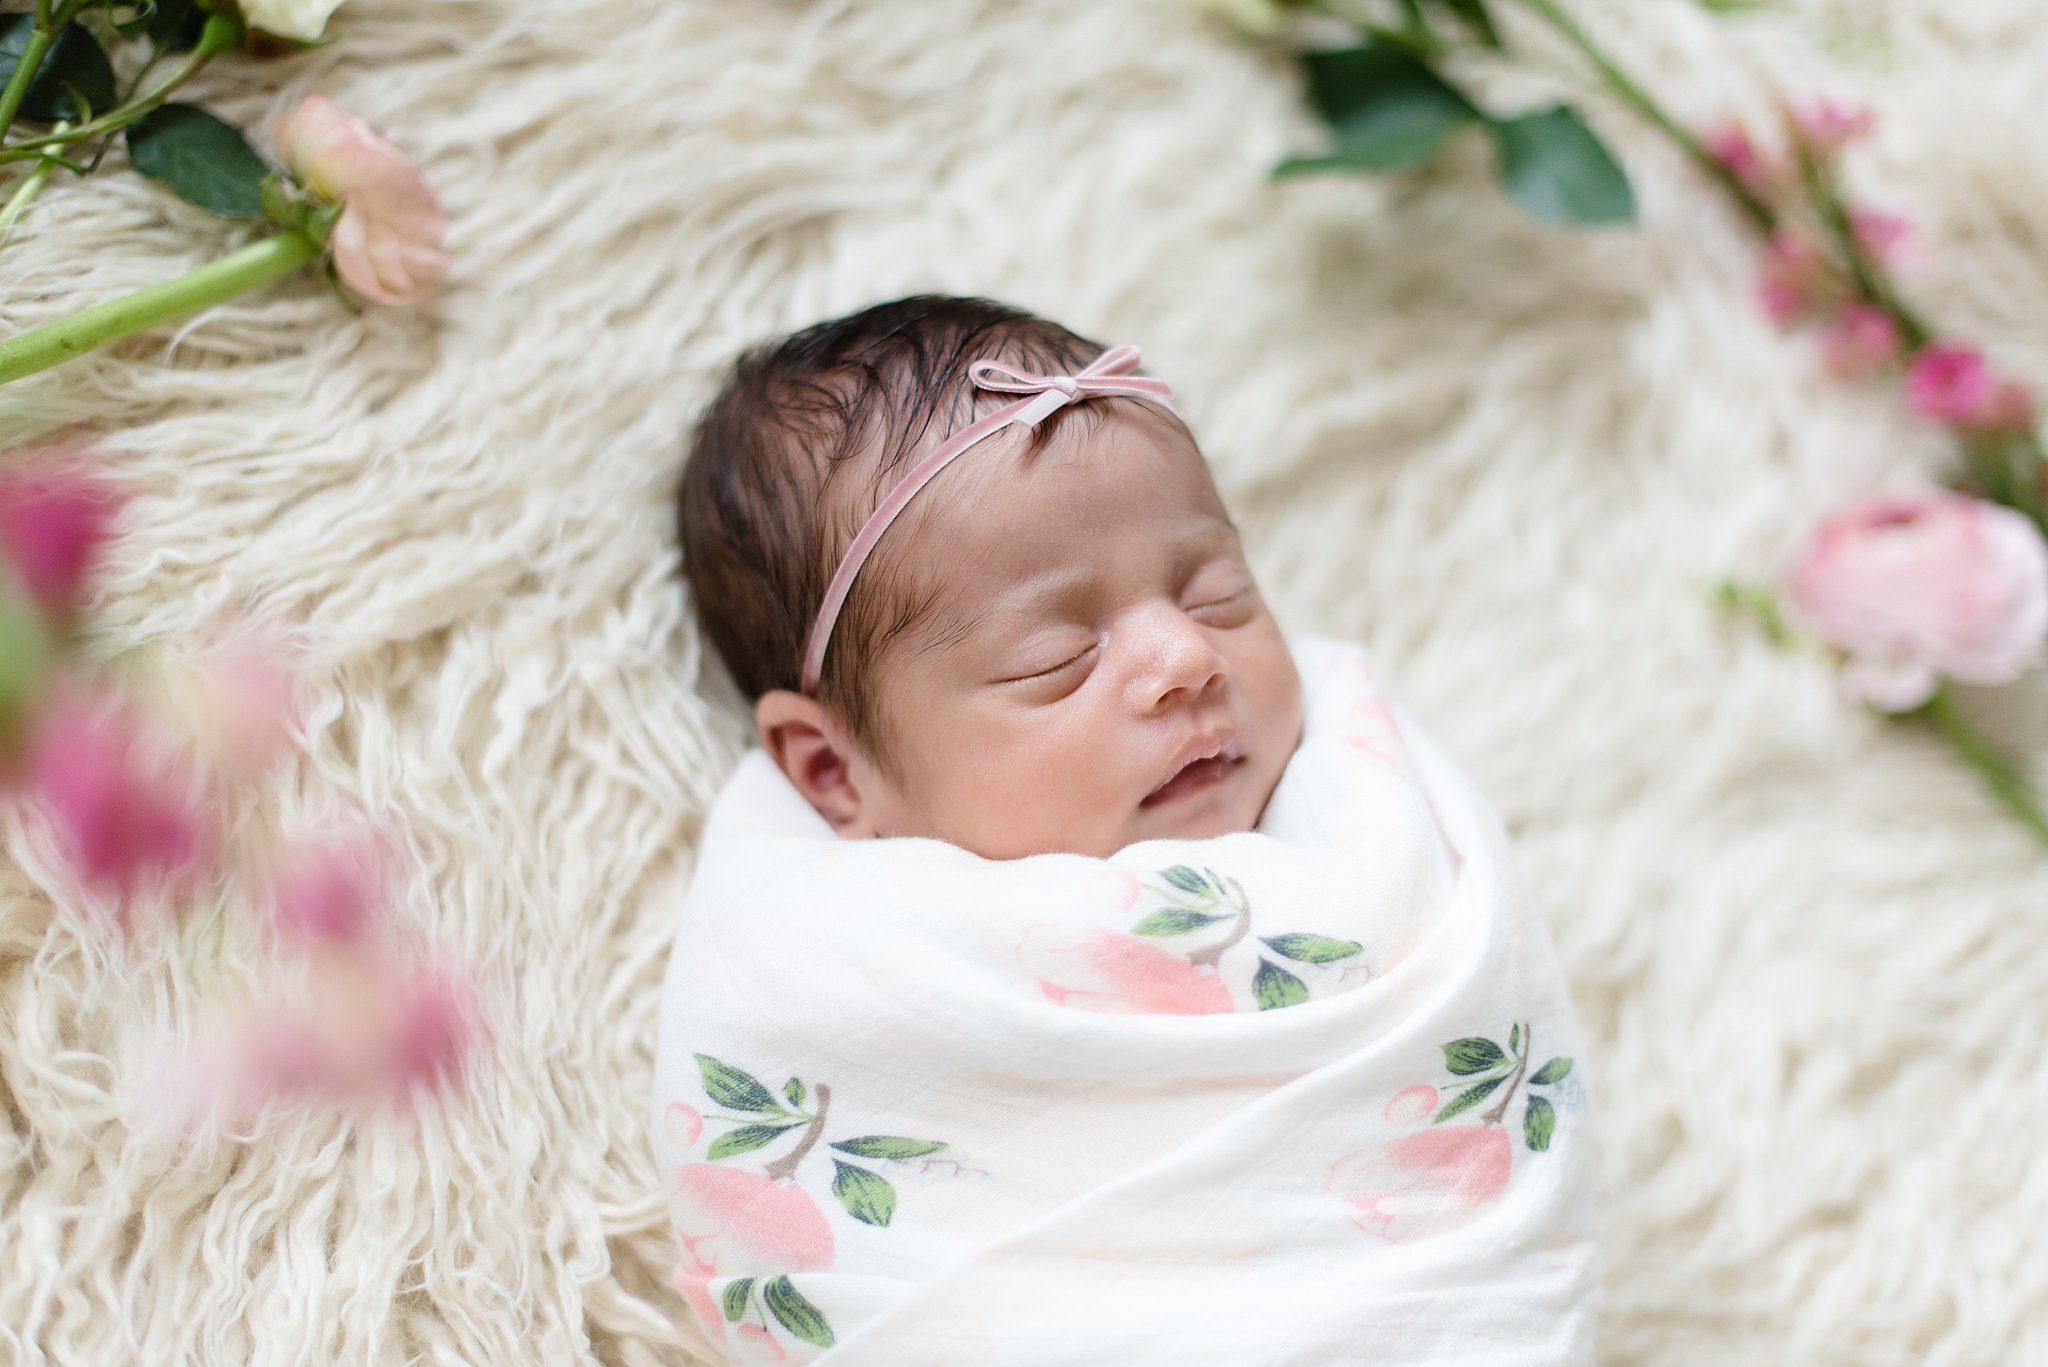  a portrait of a baby girl swaddled and wearing a bow 